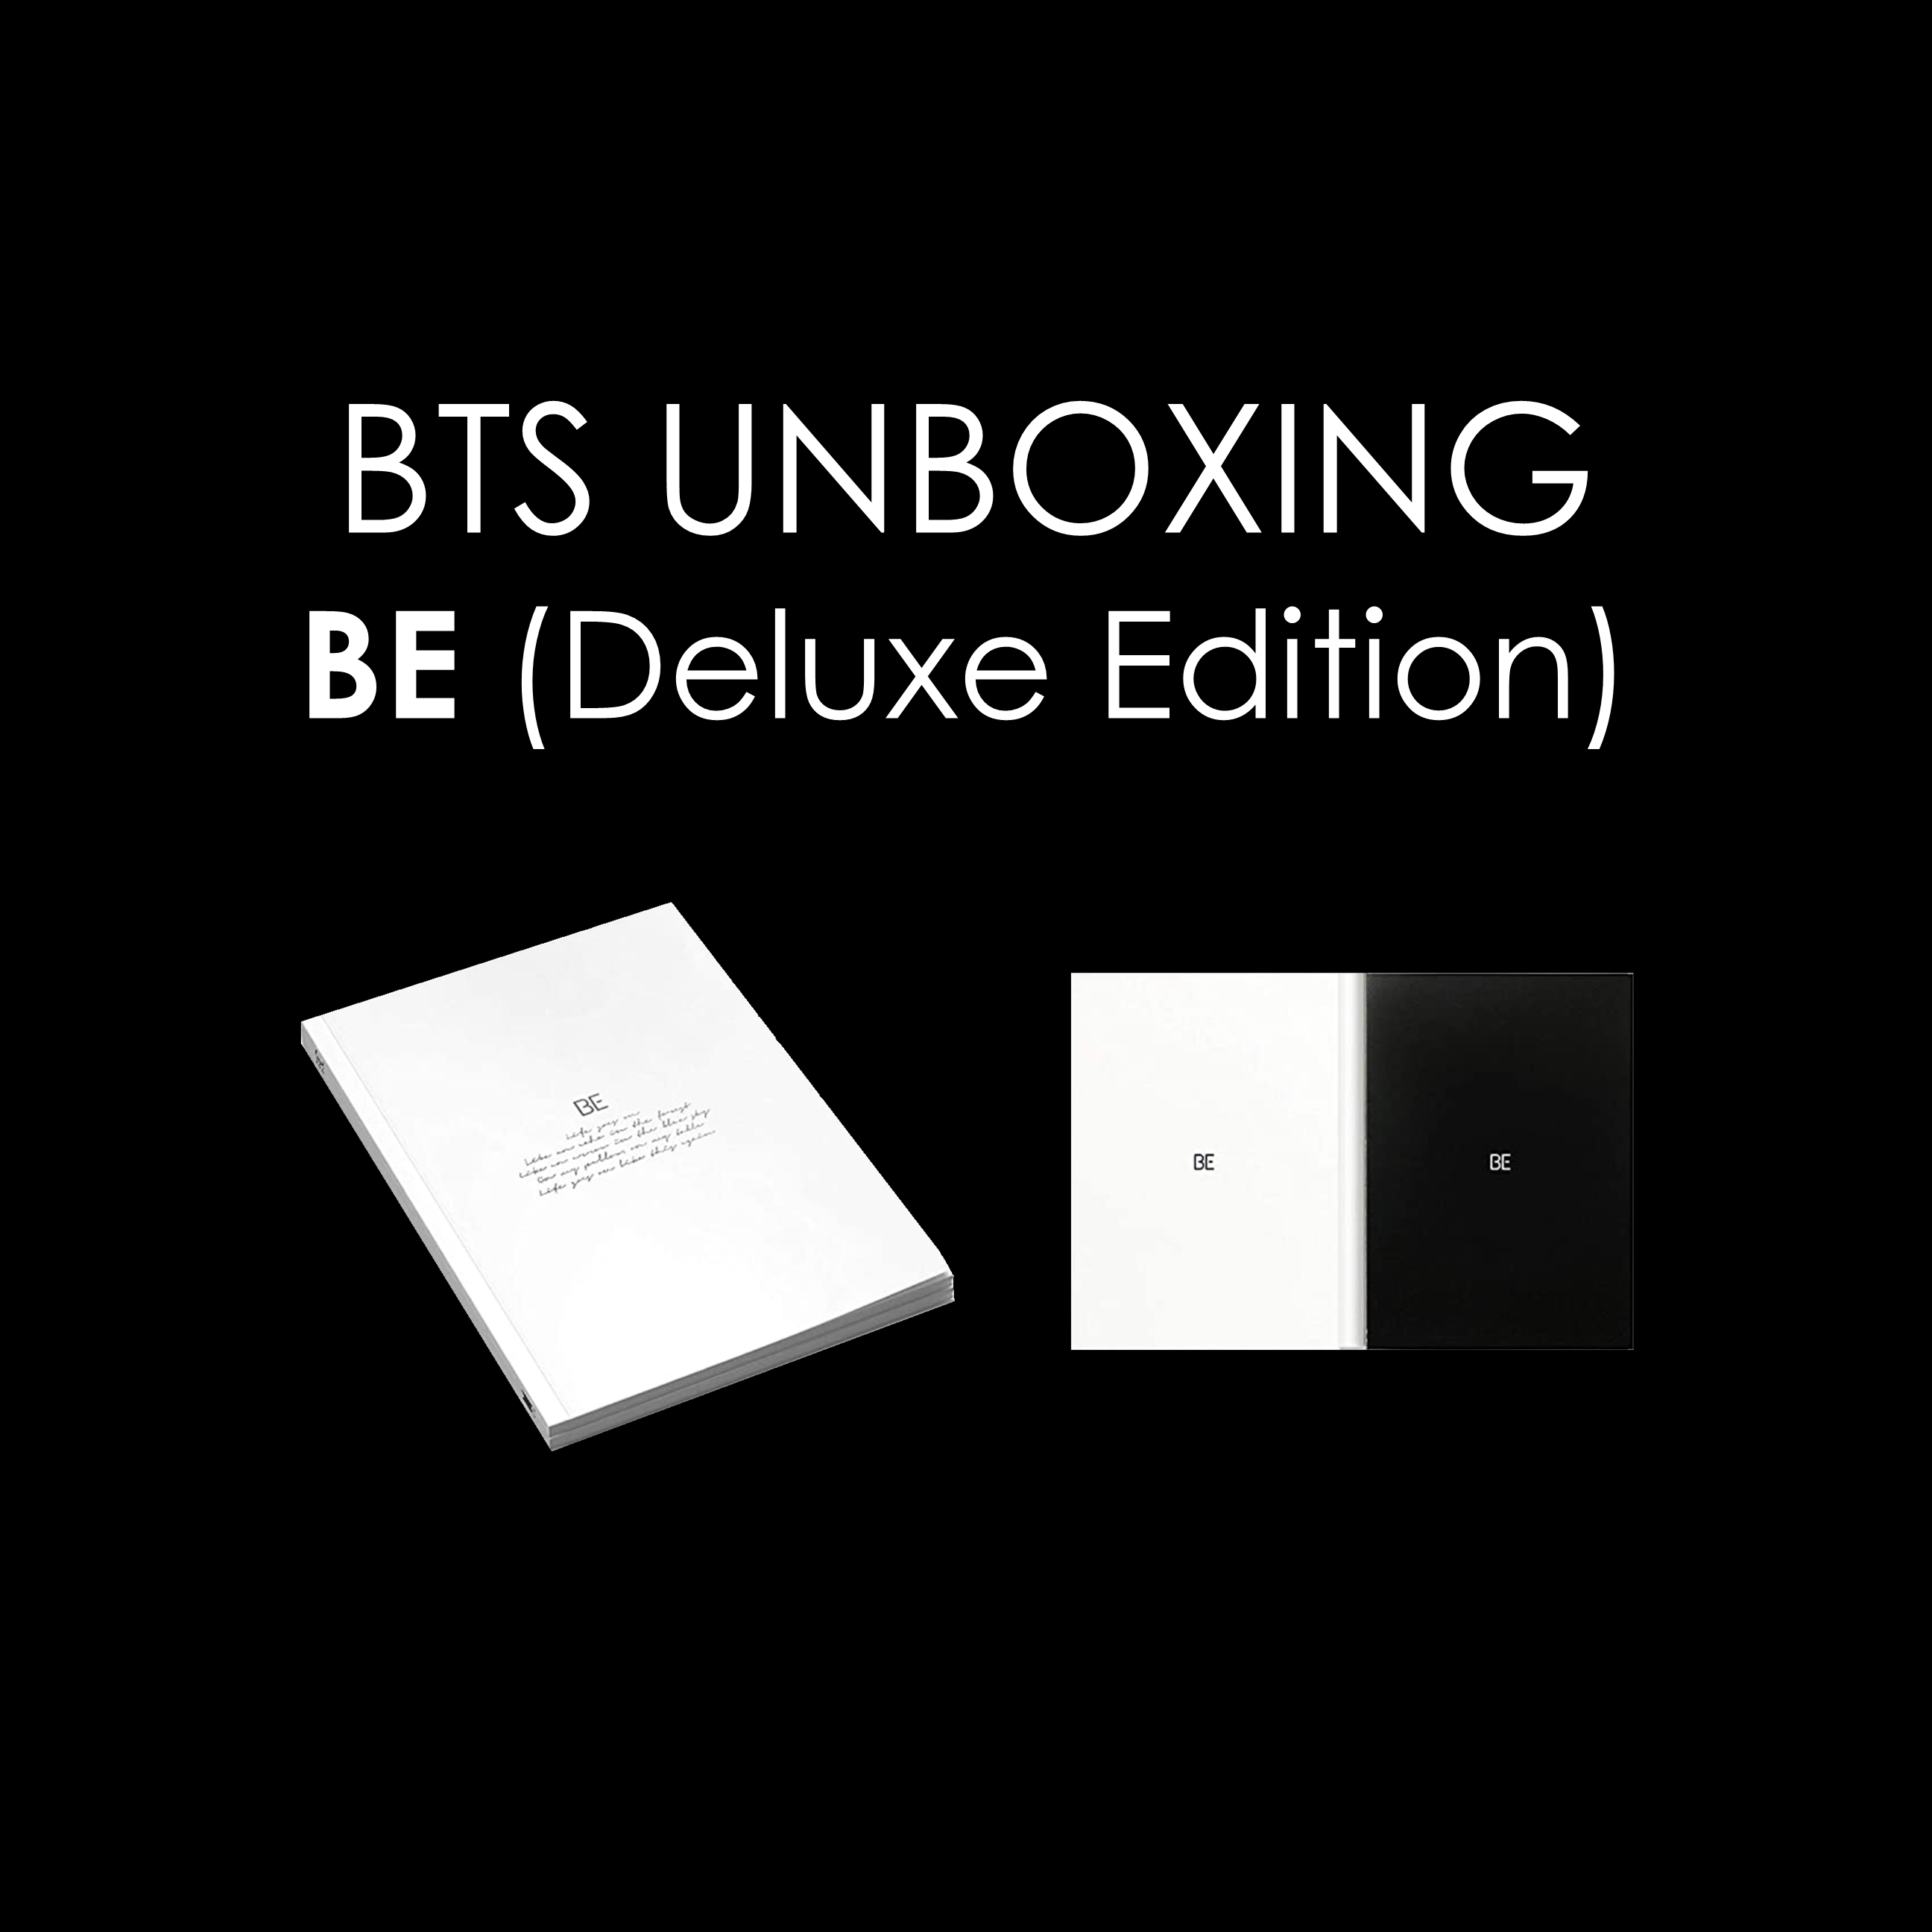 BTS Unboxing - BE (Deluxe Edition)